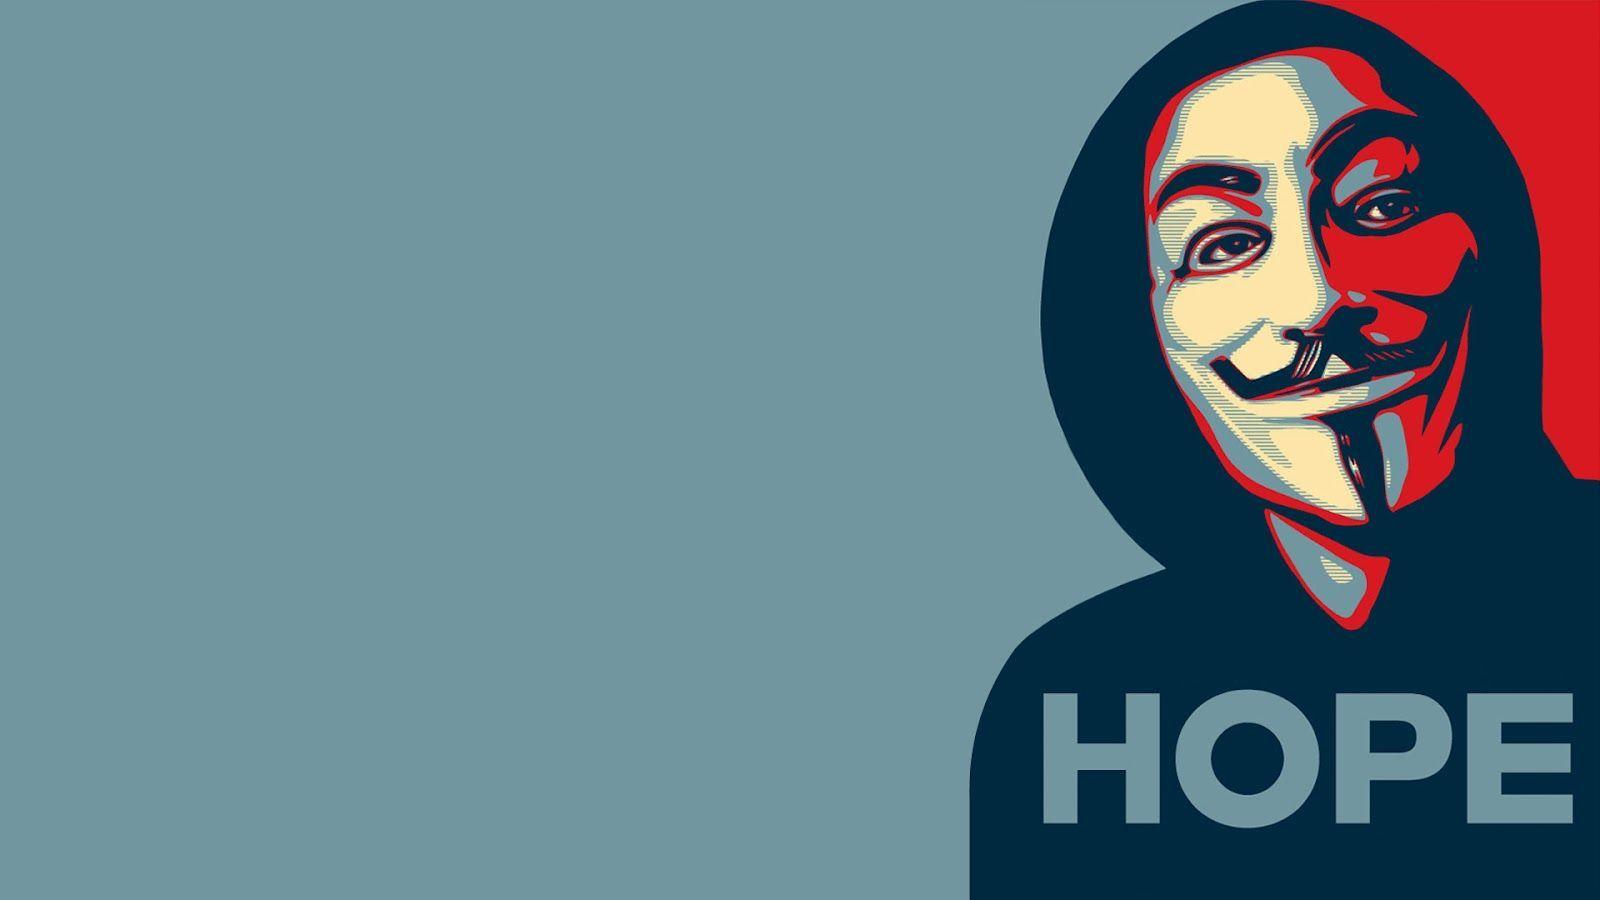 ANONYMOUS WALLPAPERS Hack The Hacker. virus guard